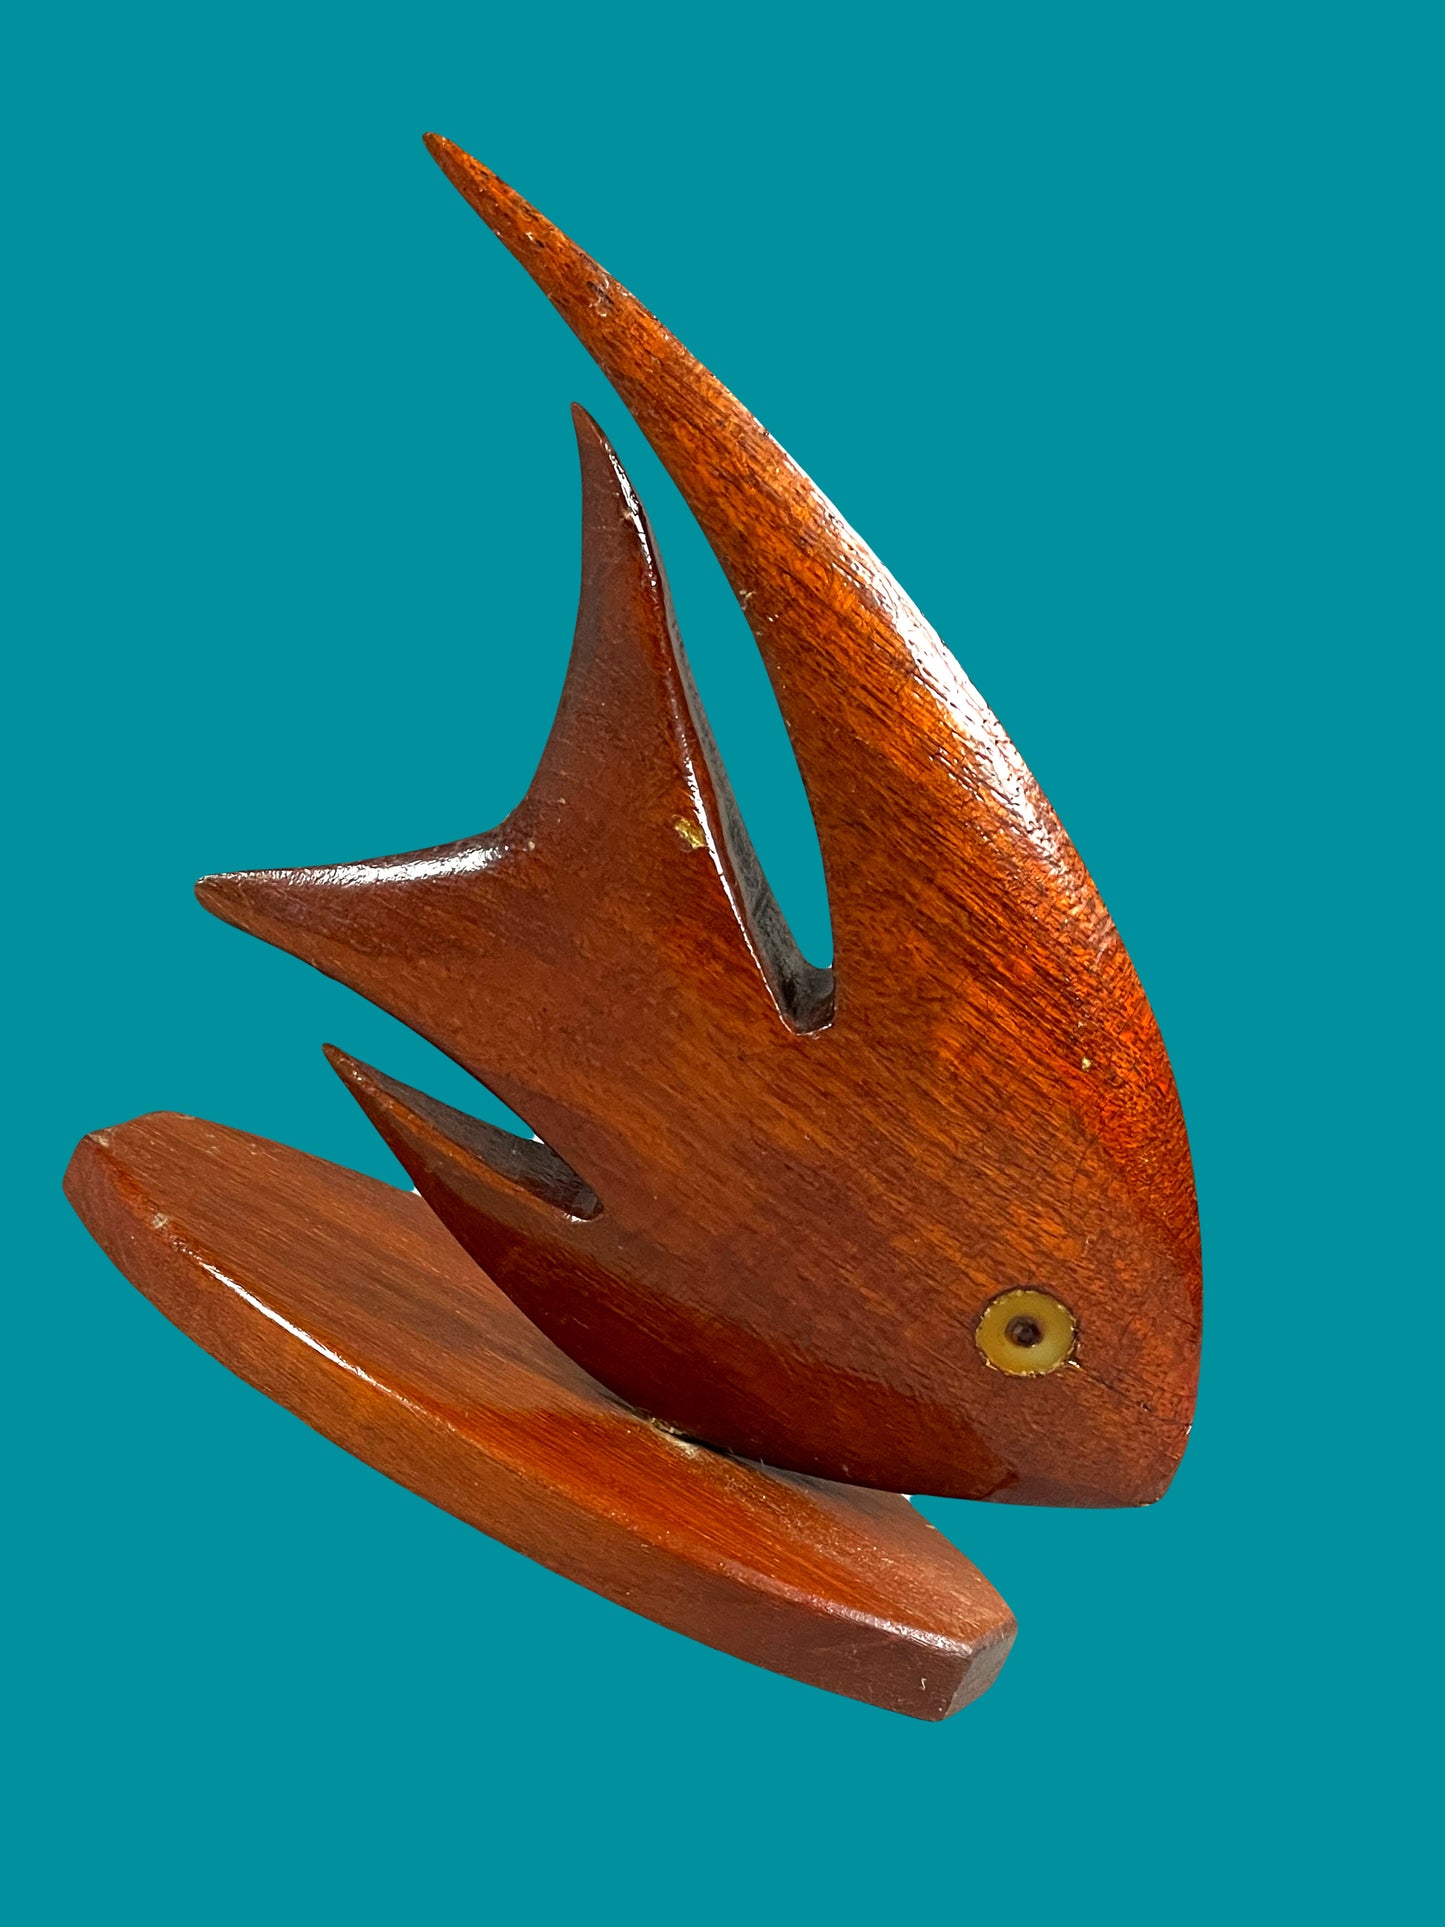 "Long Tail" lacquered dark wooden fish sculpture